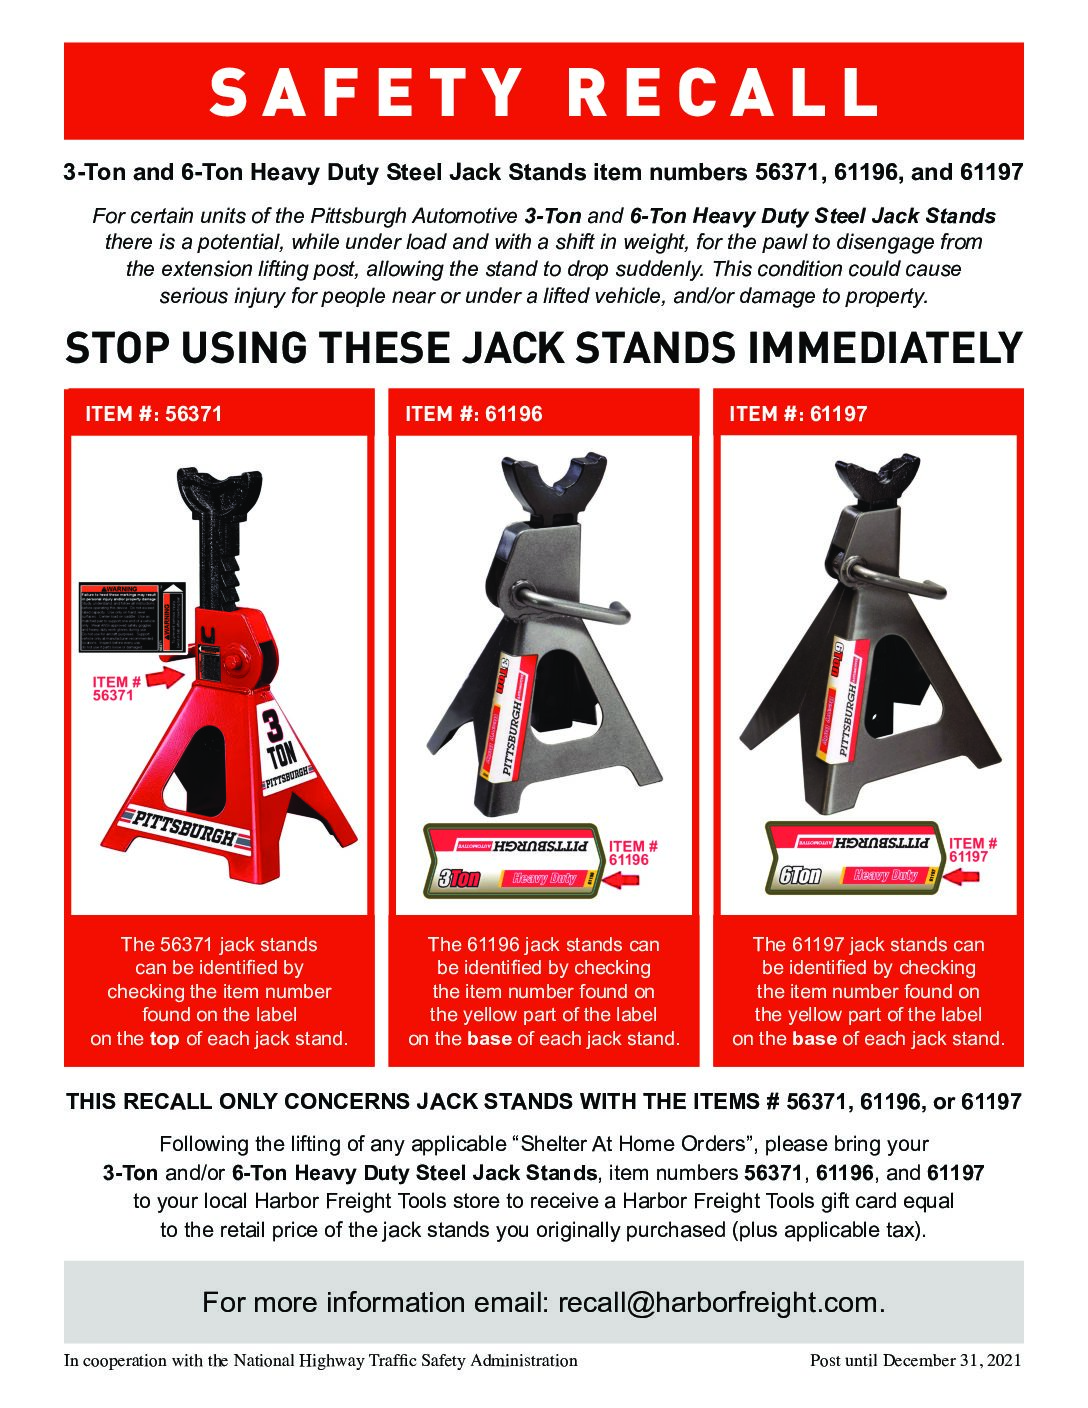 Shockingly, Almost 2 Million Jack Stands Recalled by Harbor Freight Tools, Inc.